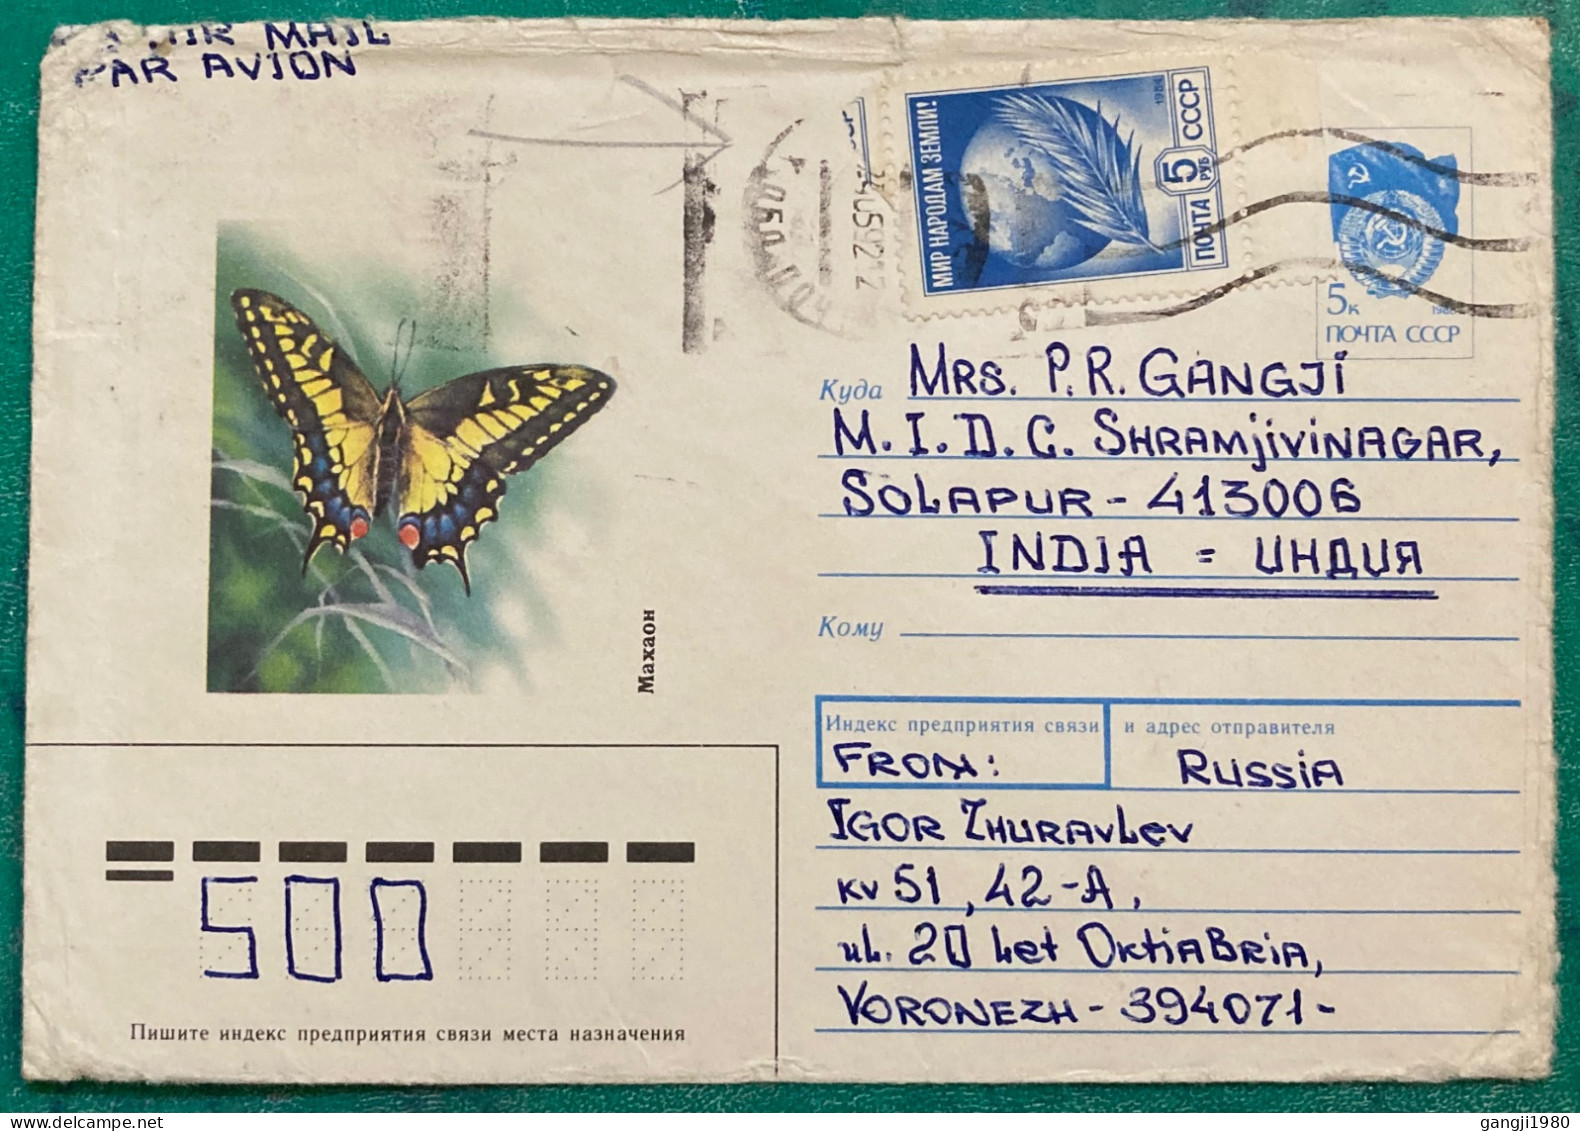 RUSSIA TO INDIA COVER USED 1992, STATIONERY COVER, ILLUSTRATE, BUTTERFLY,  GLOBE & FEATHER, COAT OF ARM FLAG, KORONEZ CI - Storia Postale